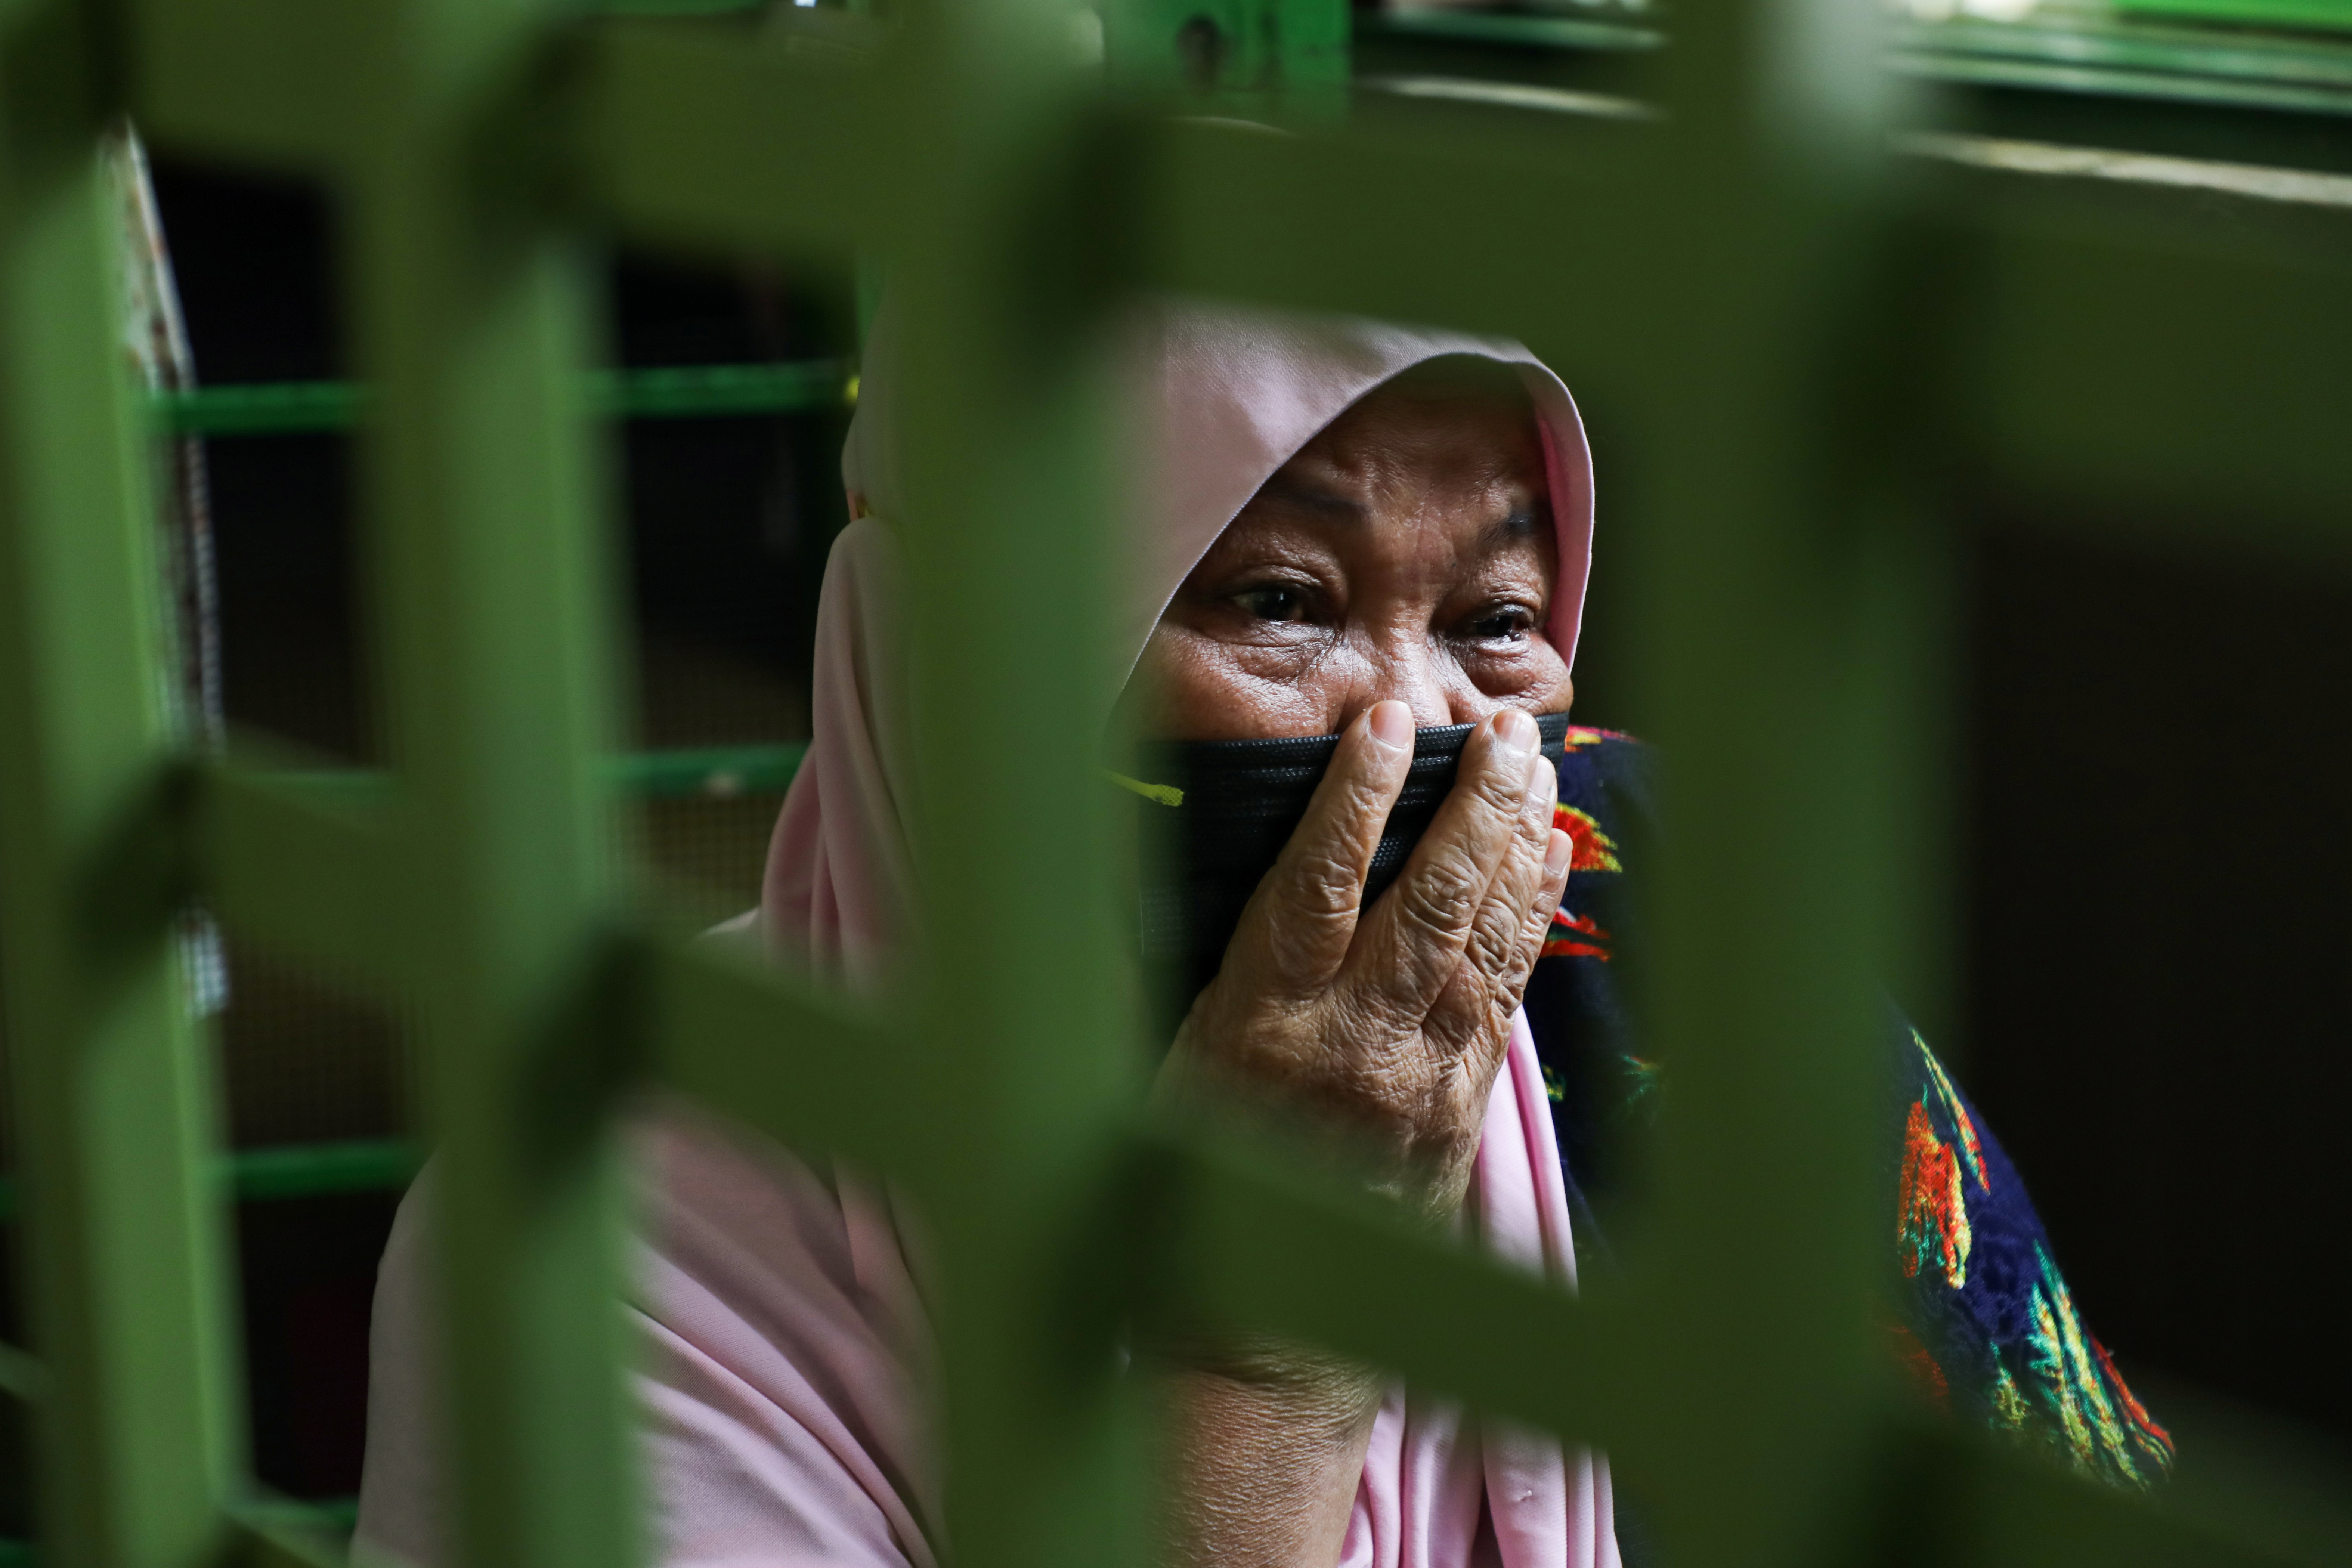 Halijah Naemat, 74, cries while members of public come over to help after she hung a white flag outside her home during an enhanced lockdown in Petaling Jaya